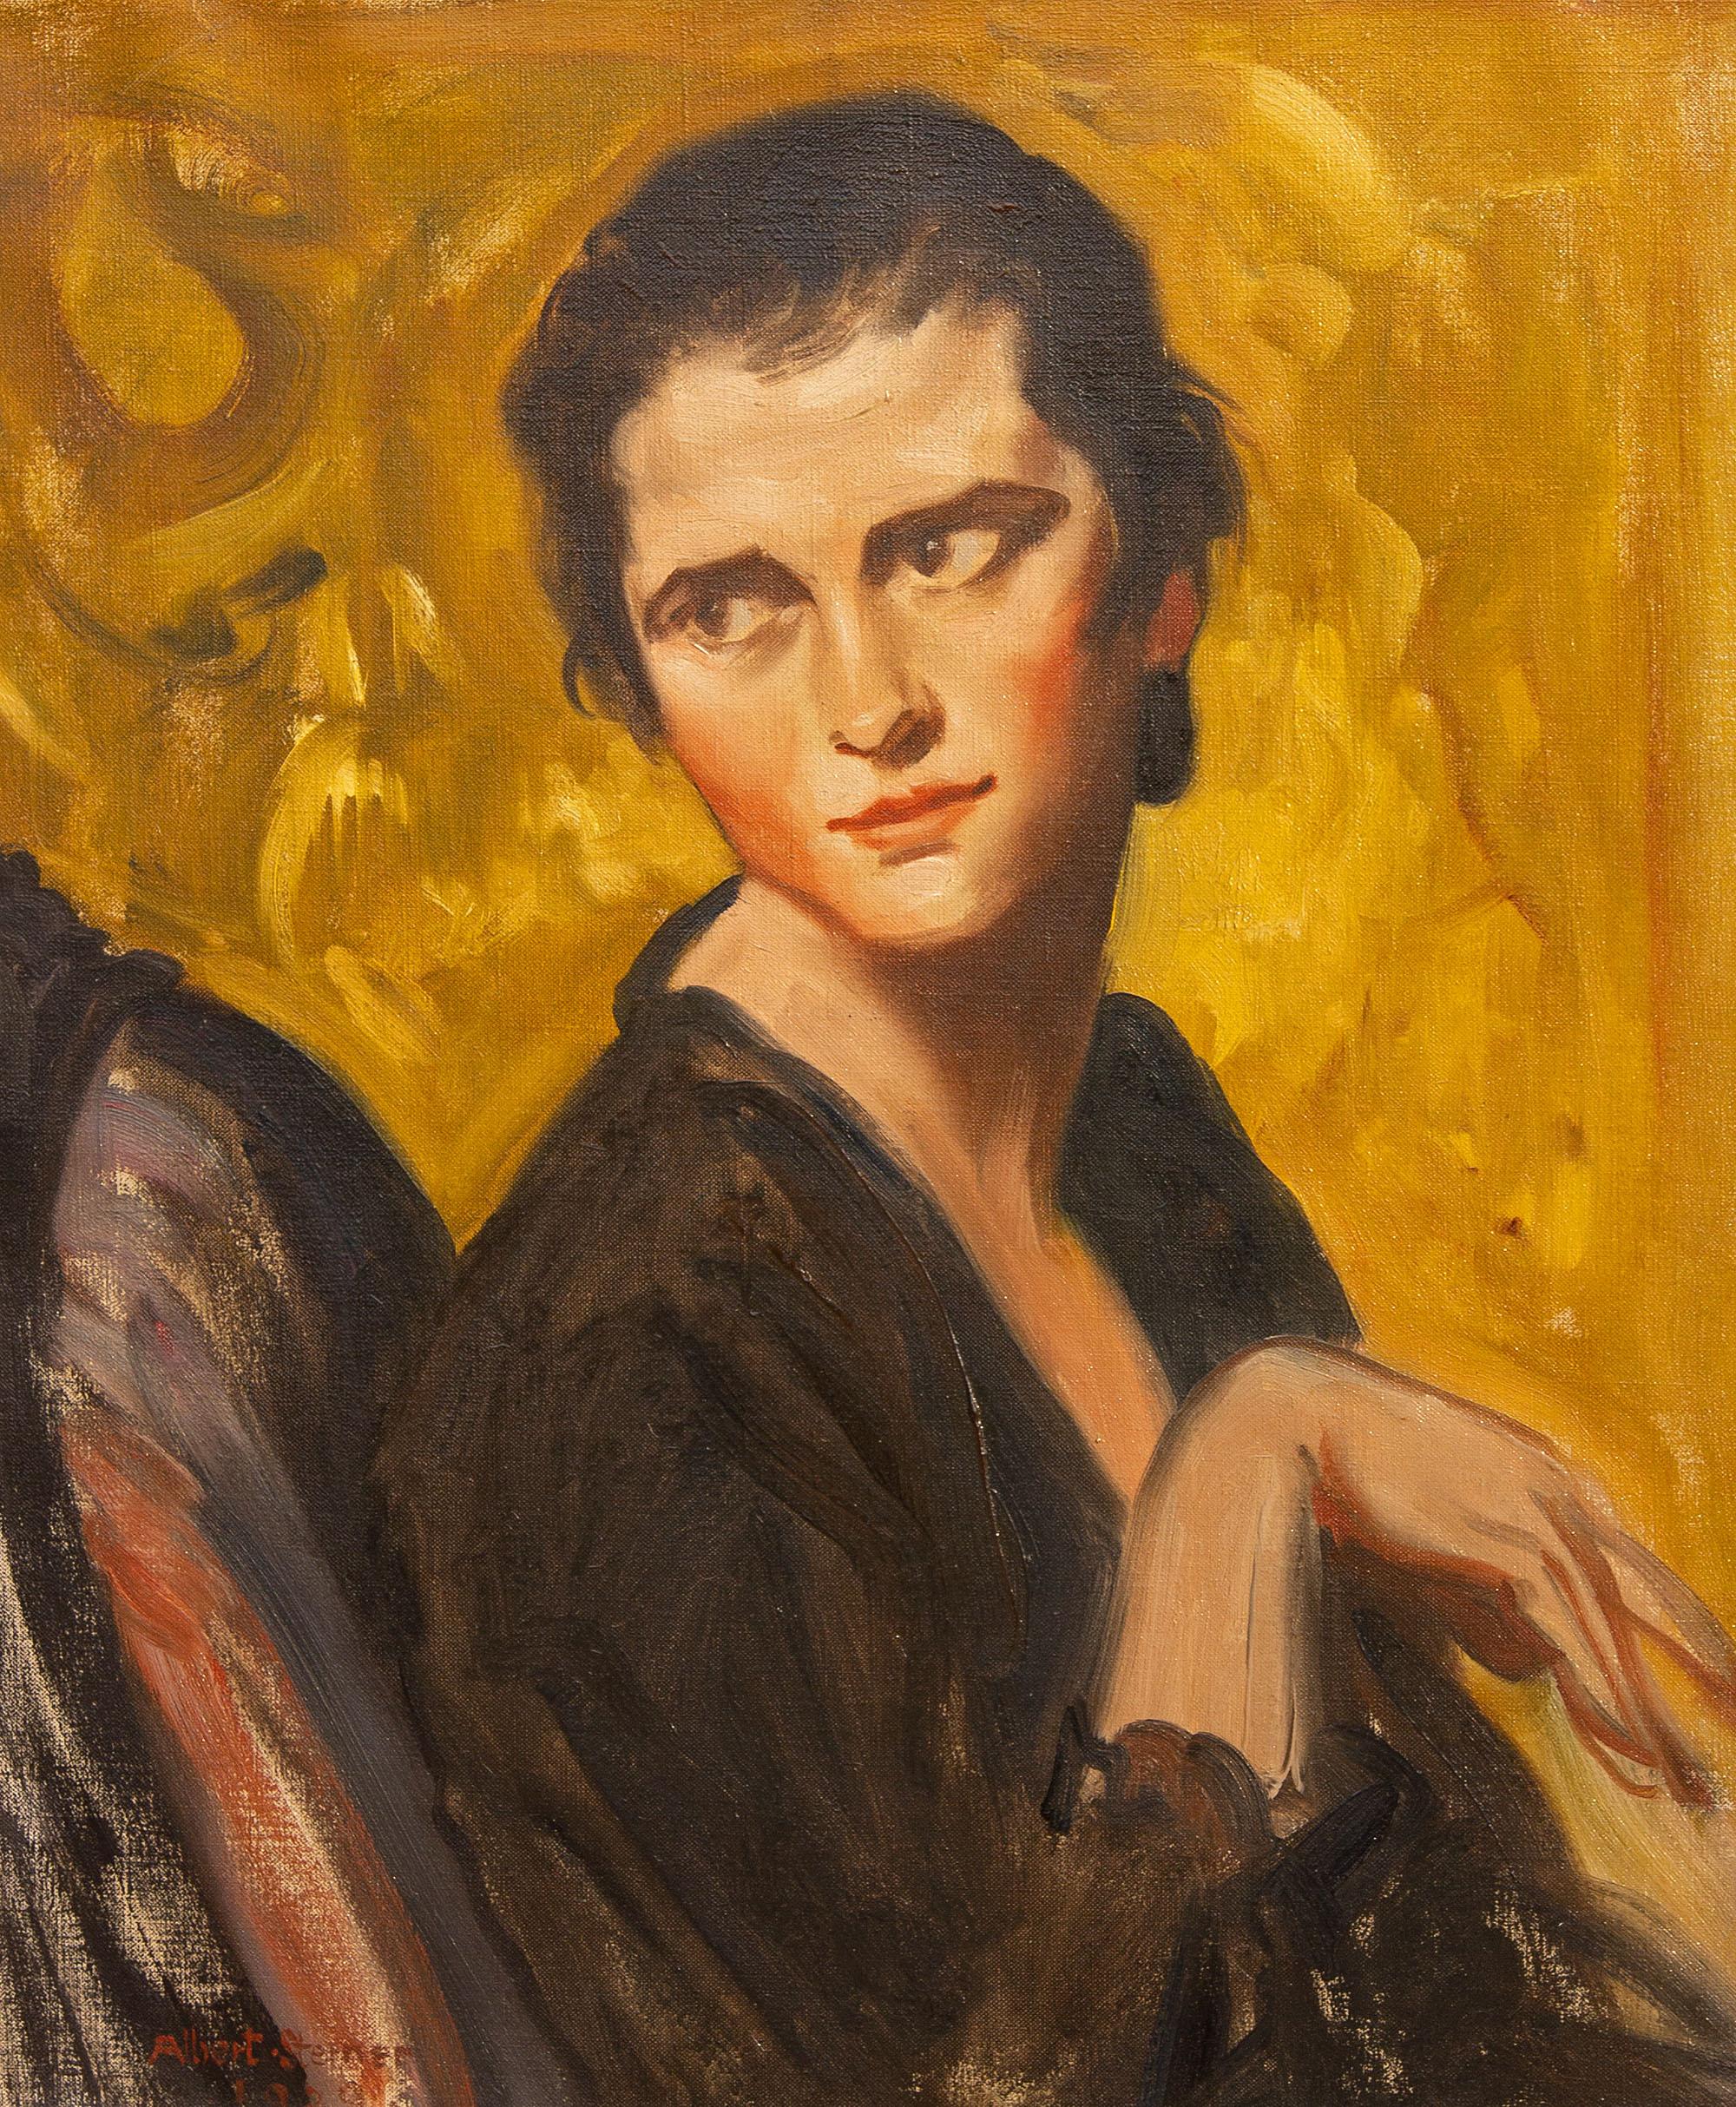 Impressionist painting of Vivienne Gieson by American artist Albert Sterner. Oil on canvas. Dated 1929. In carved giltwood frame by Heydenryk. Gieseon appeared with Martha Graham in 